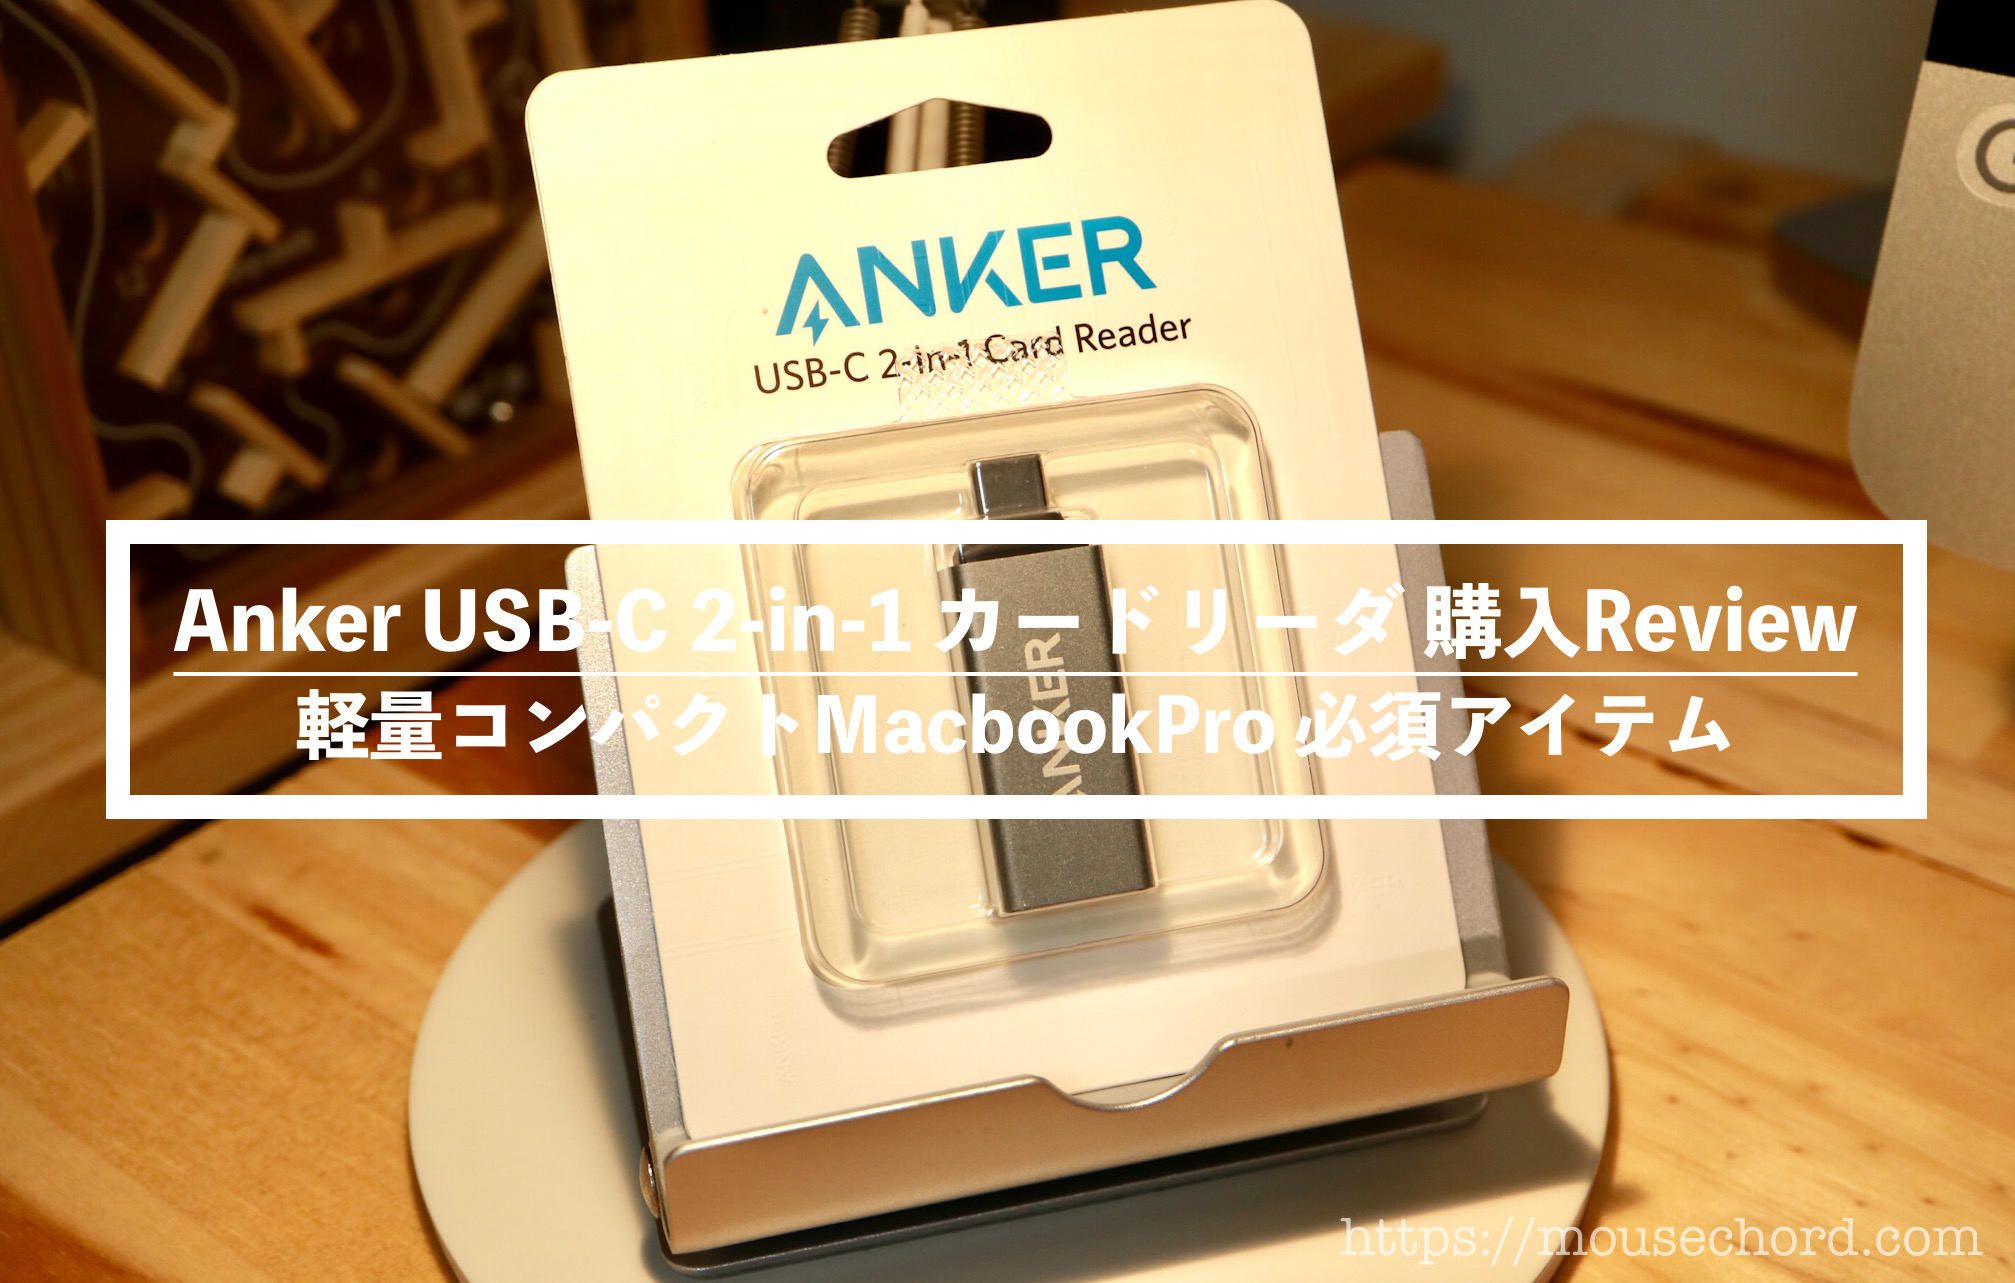 Anker USB-C 2 in 1 カードリーダ購入Review - MouseChord.com